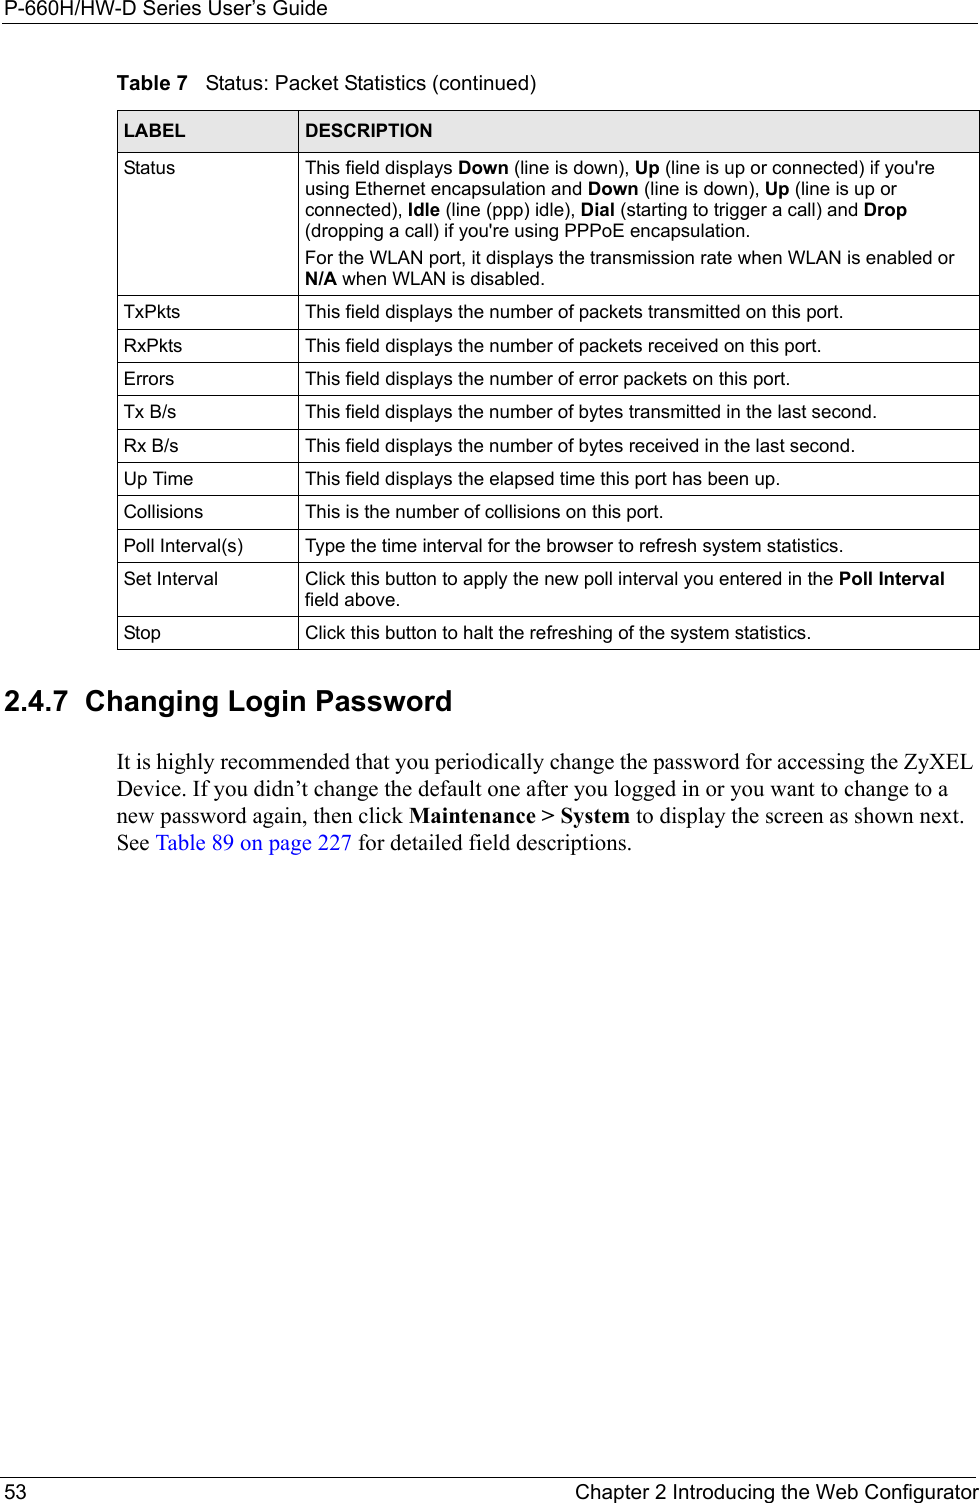 P-660H/HW-D Series User’s Guide53 Chapter 2 Introducing the Web Configurator2.4.7  Changing Login Password It is highly recommended that you periodically change the password for accessing the ZyXEL Device. If you didn’t change the default one after you logged in or you want to change to a new password again, then click Maintenance &gt; System to display the screen as shown next. See Table 89 on page 227 for detailed field descriptions.Status  This field displays Down (line is down), Up (line is up or connected) if you&apos;re using Ethernet encapsulation and Down (line is down), Up (line is up or connected), Idle (line (ppp) idle), Dial (starting to trigger a call) and Drop (dropping a call) if you&apos;re using PPPoE encapsulation.For the WLAN port, it displays the transmission rate when WLAN is enabled or  N/A when WLAN is disabled.TxPkts  This field displays the number of packets transmitted on this port.RxPkts  This field displays the number of packets received on this port.Errors This field displays the number of error packets on this port. Tx B/s  This field displays the number of bytes transmitted in the last second.Rx B/s This field displays the number of bytes received in the last second.Up Time  This field displays the elapsed time this port has been up. Collisions This is the number of collisions on this port.Poll Interval(s) Type the time interval for the browser to refresh system statistics.Set Interval Click this button to apply the new poll interval you entered in the Poll Interval field above.Stop Click this button to halt the refreshing of the system statistics.Table 7   Status: Packet Statistics (continued)LABEL DESCRIPTION